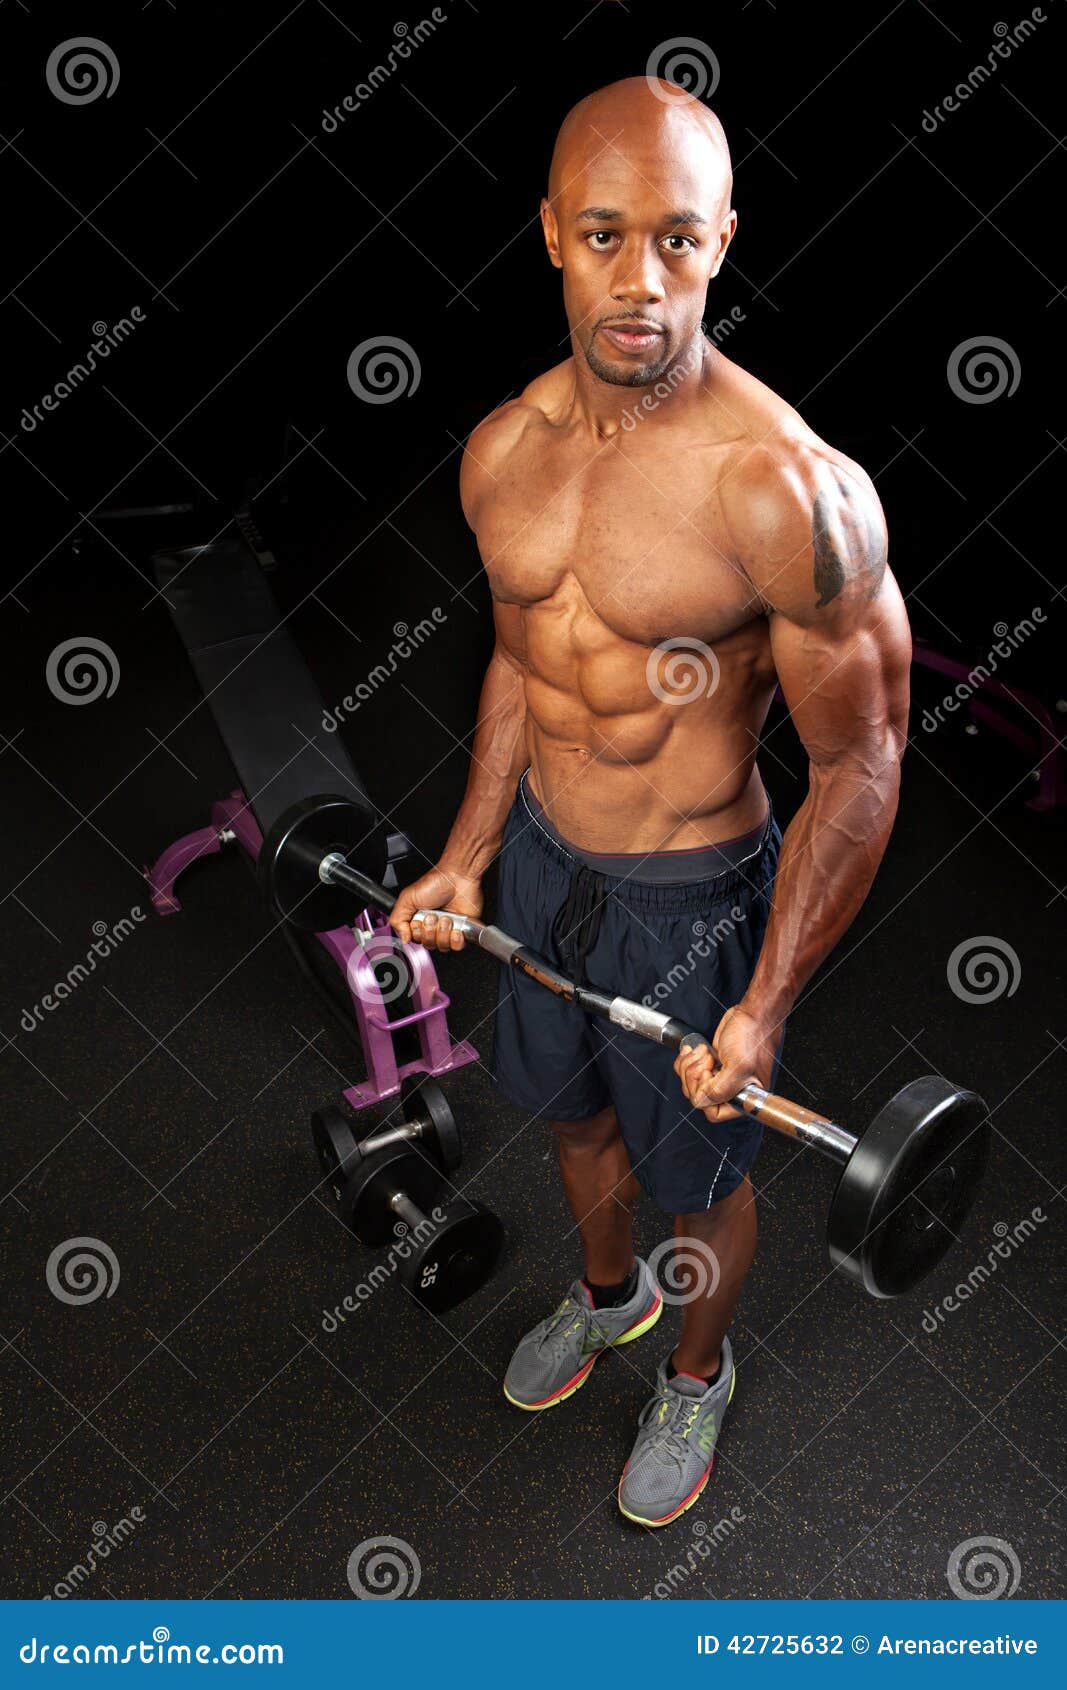 Toned and ripped lean muscle fitness  | Stock image 